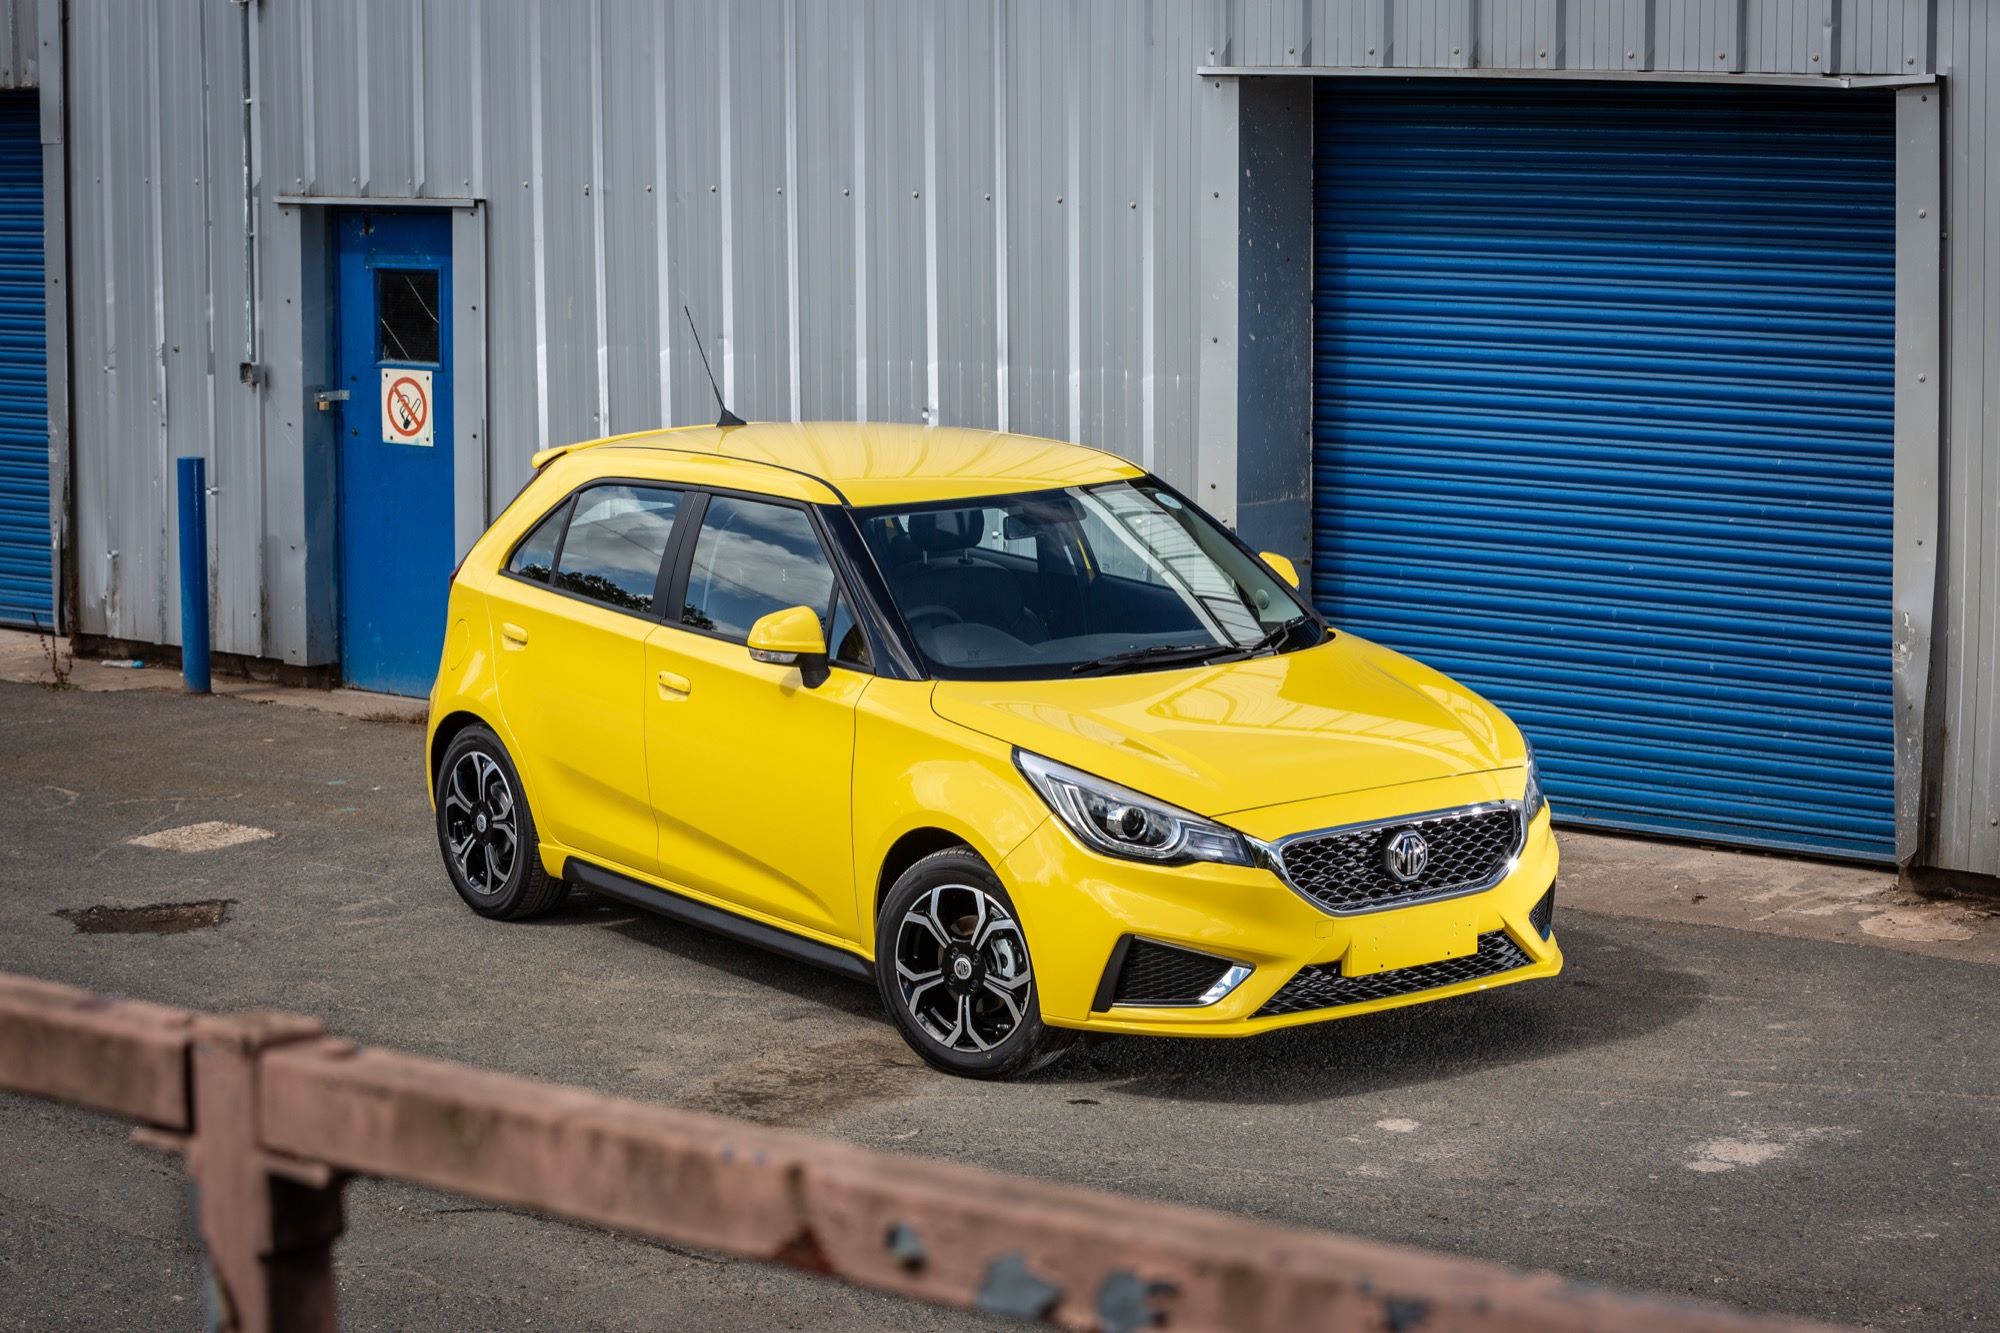 The New MG3 Has Arrived At Frasers!